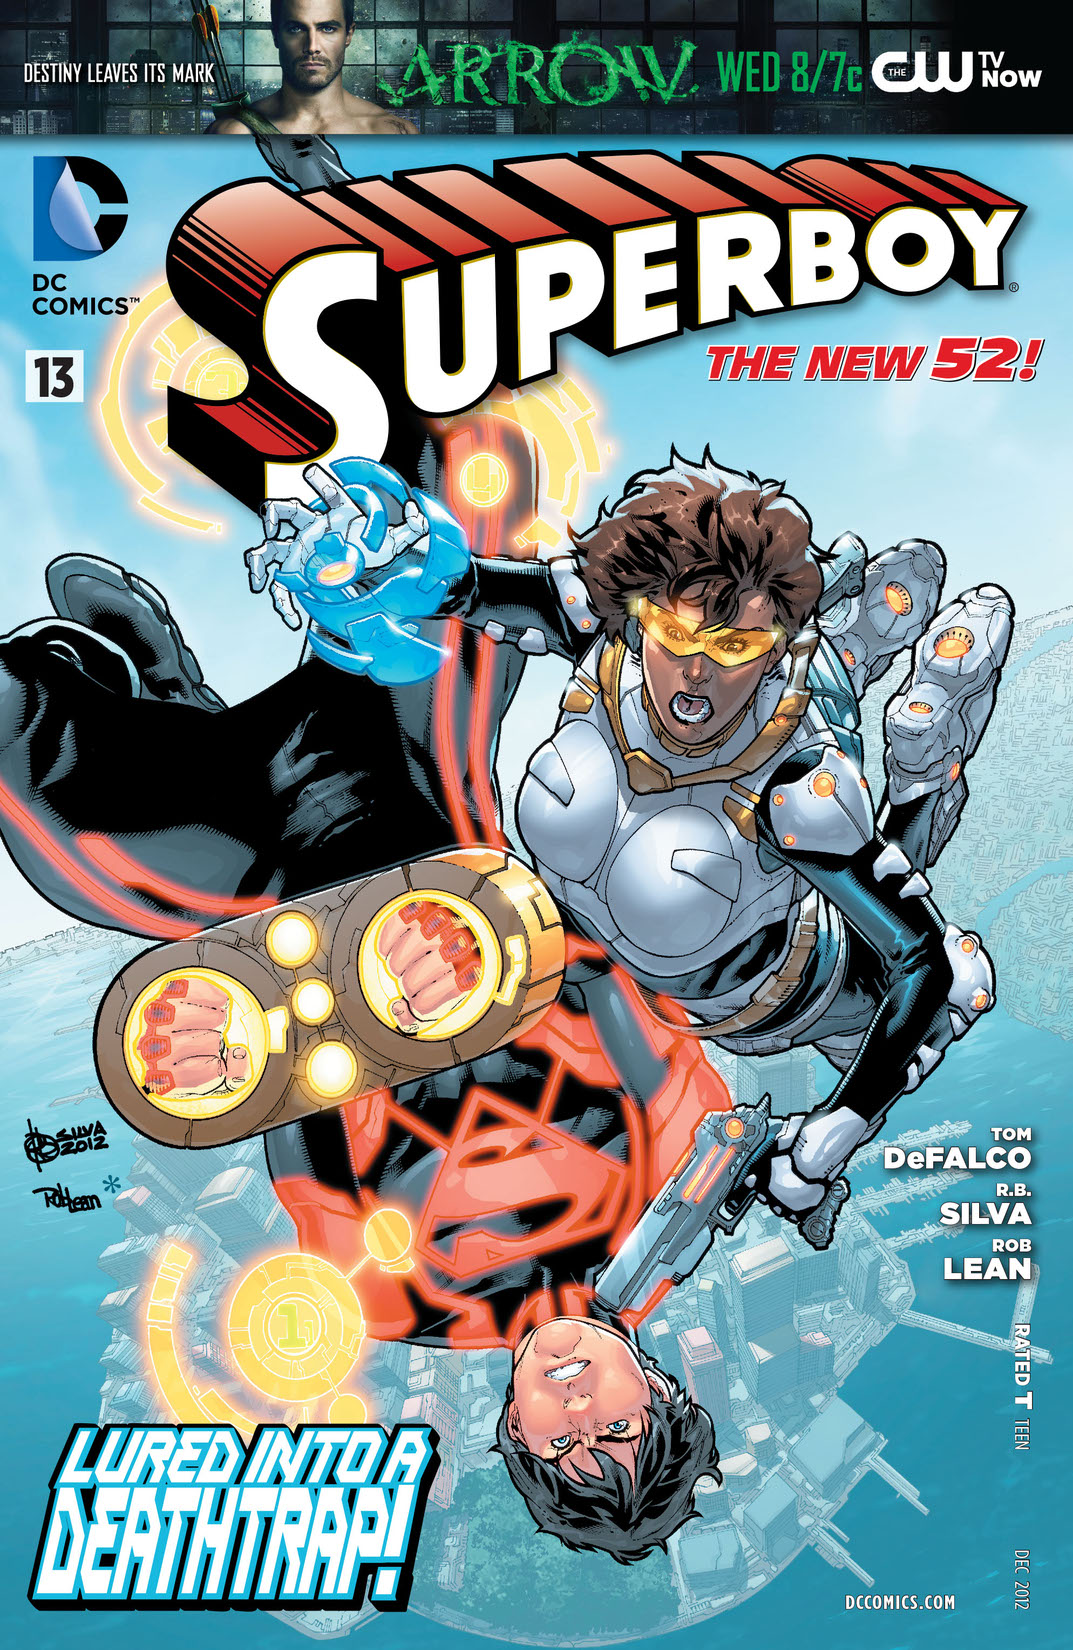 Superboy (2011-) #13 preview images